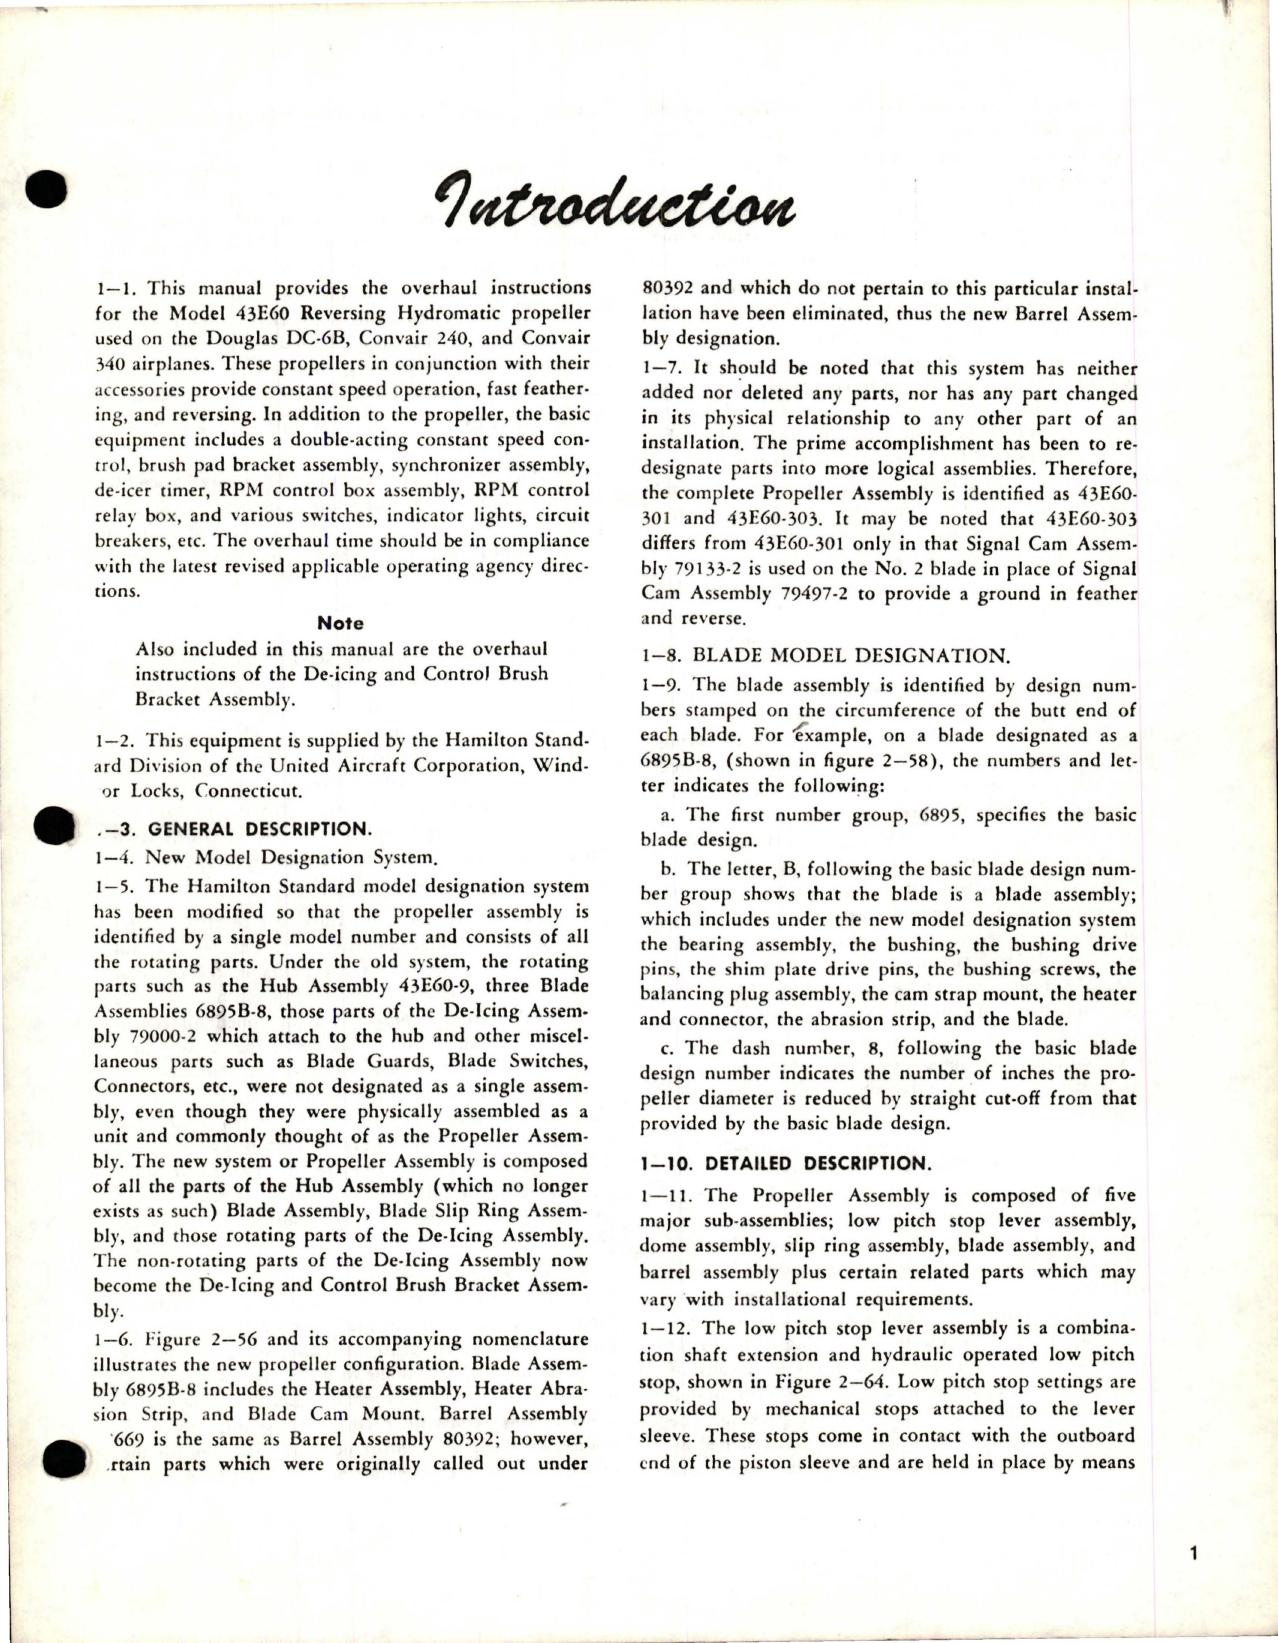 Sample page 7 from AirCorps Library document: Overhaul Manual for Hydromatic Reversing Propellers - Model 43E60